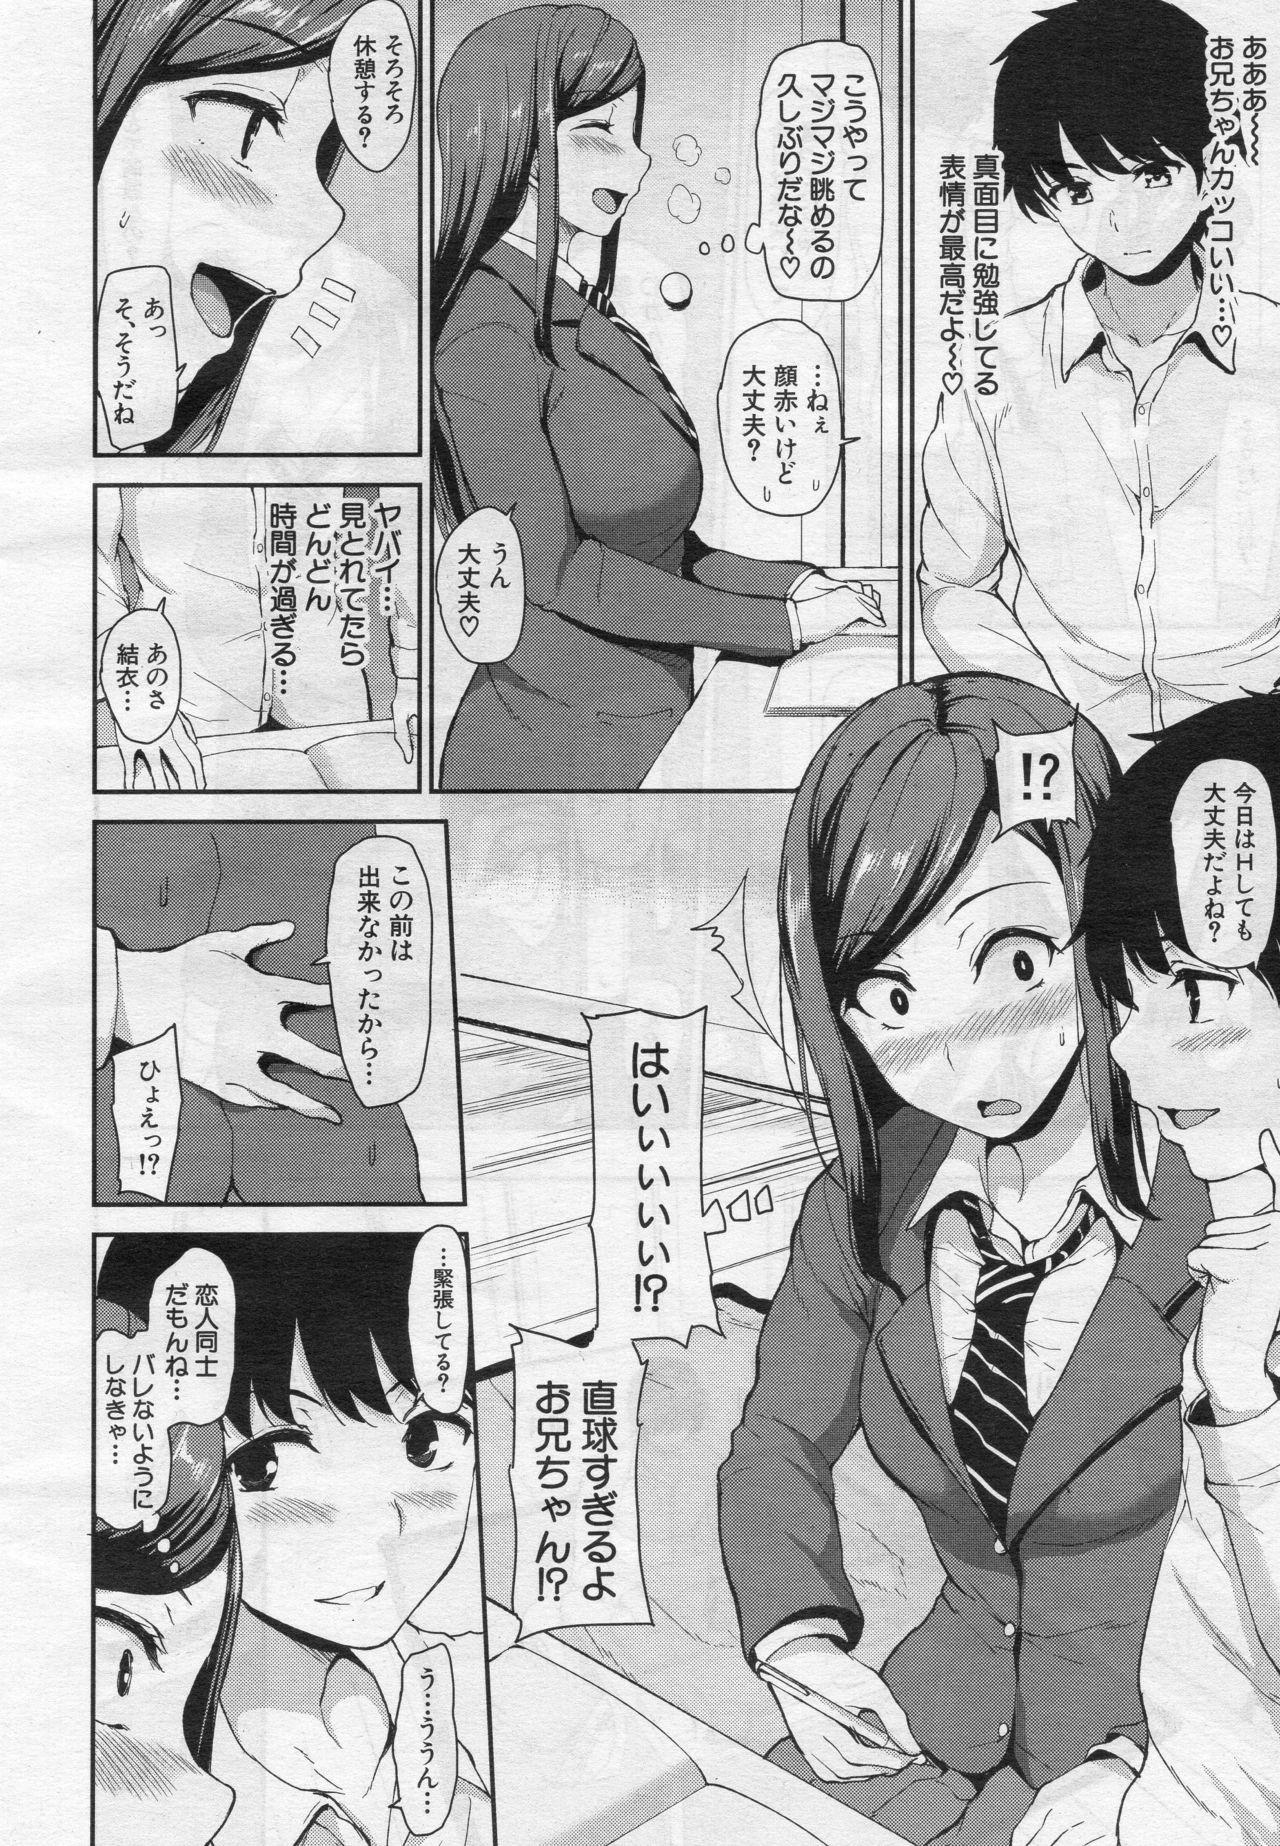 Leaked Osananajimi to Imouto - A childhood friend and younger sister Gay Boysporn - Page 10